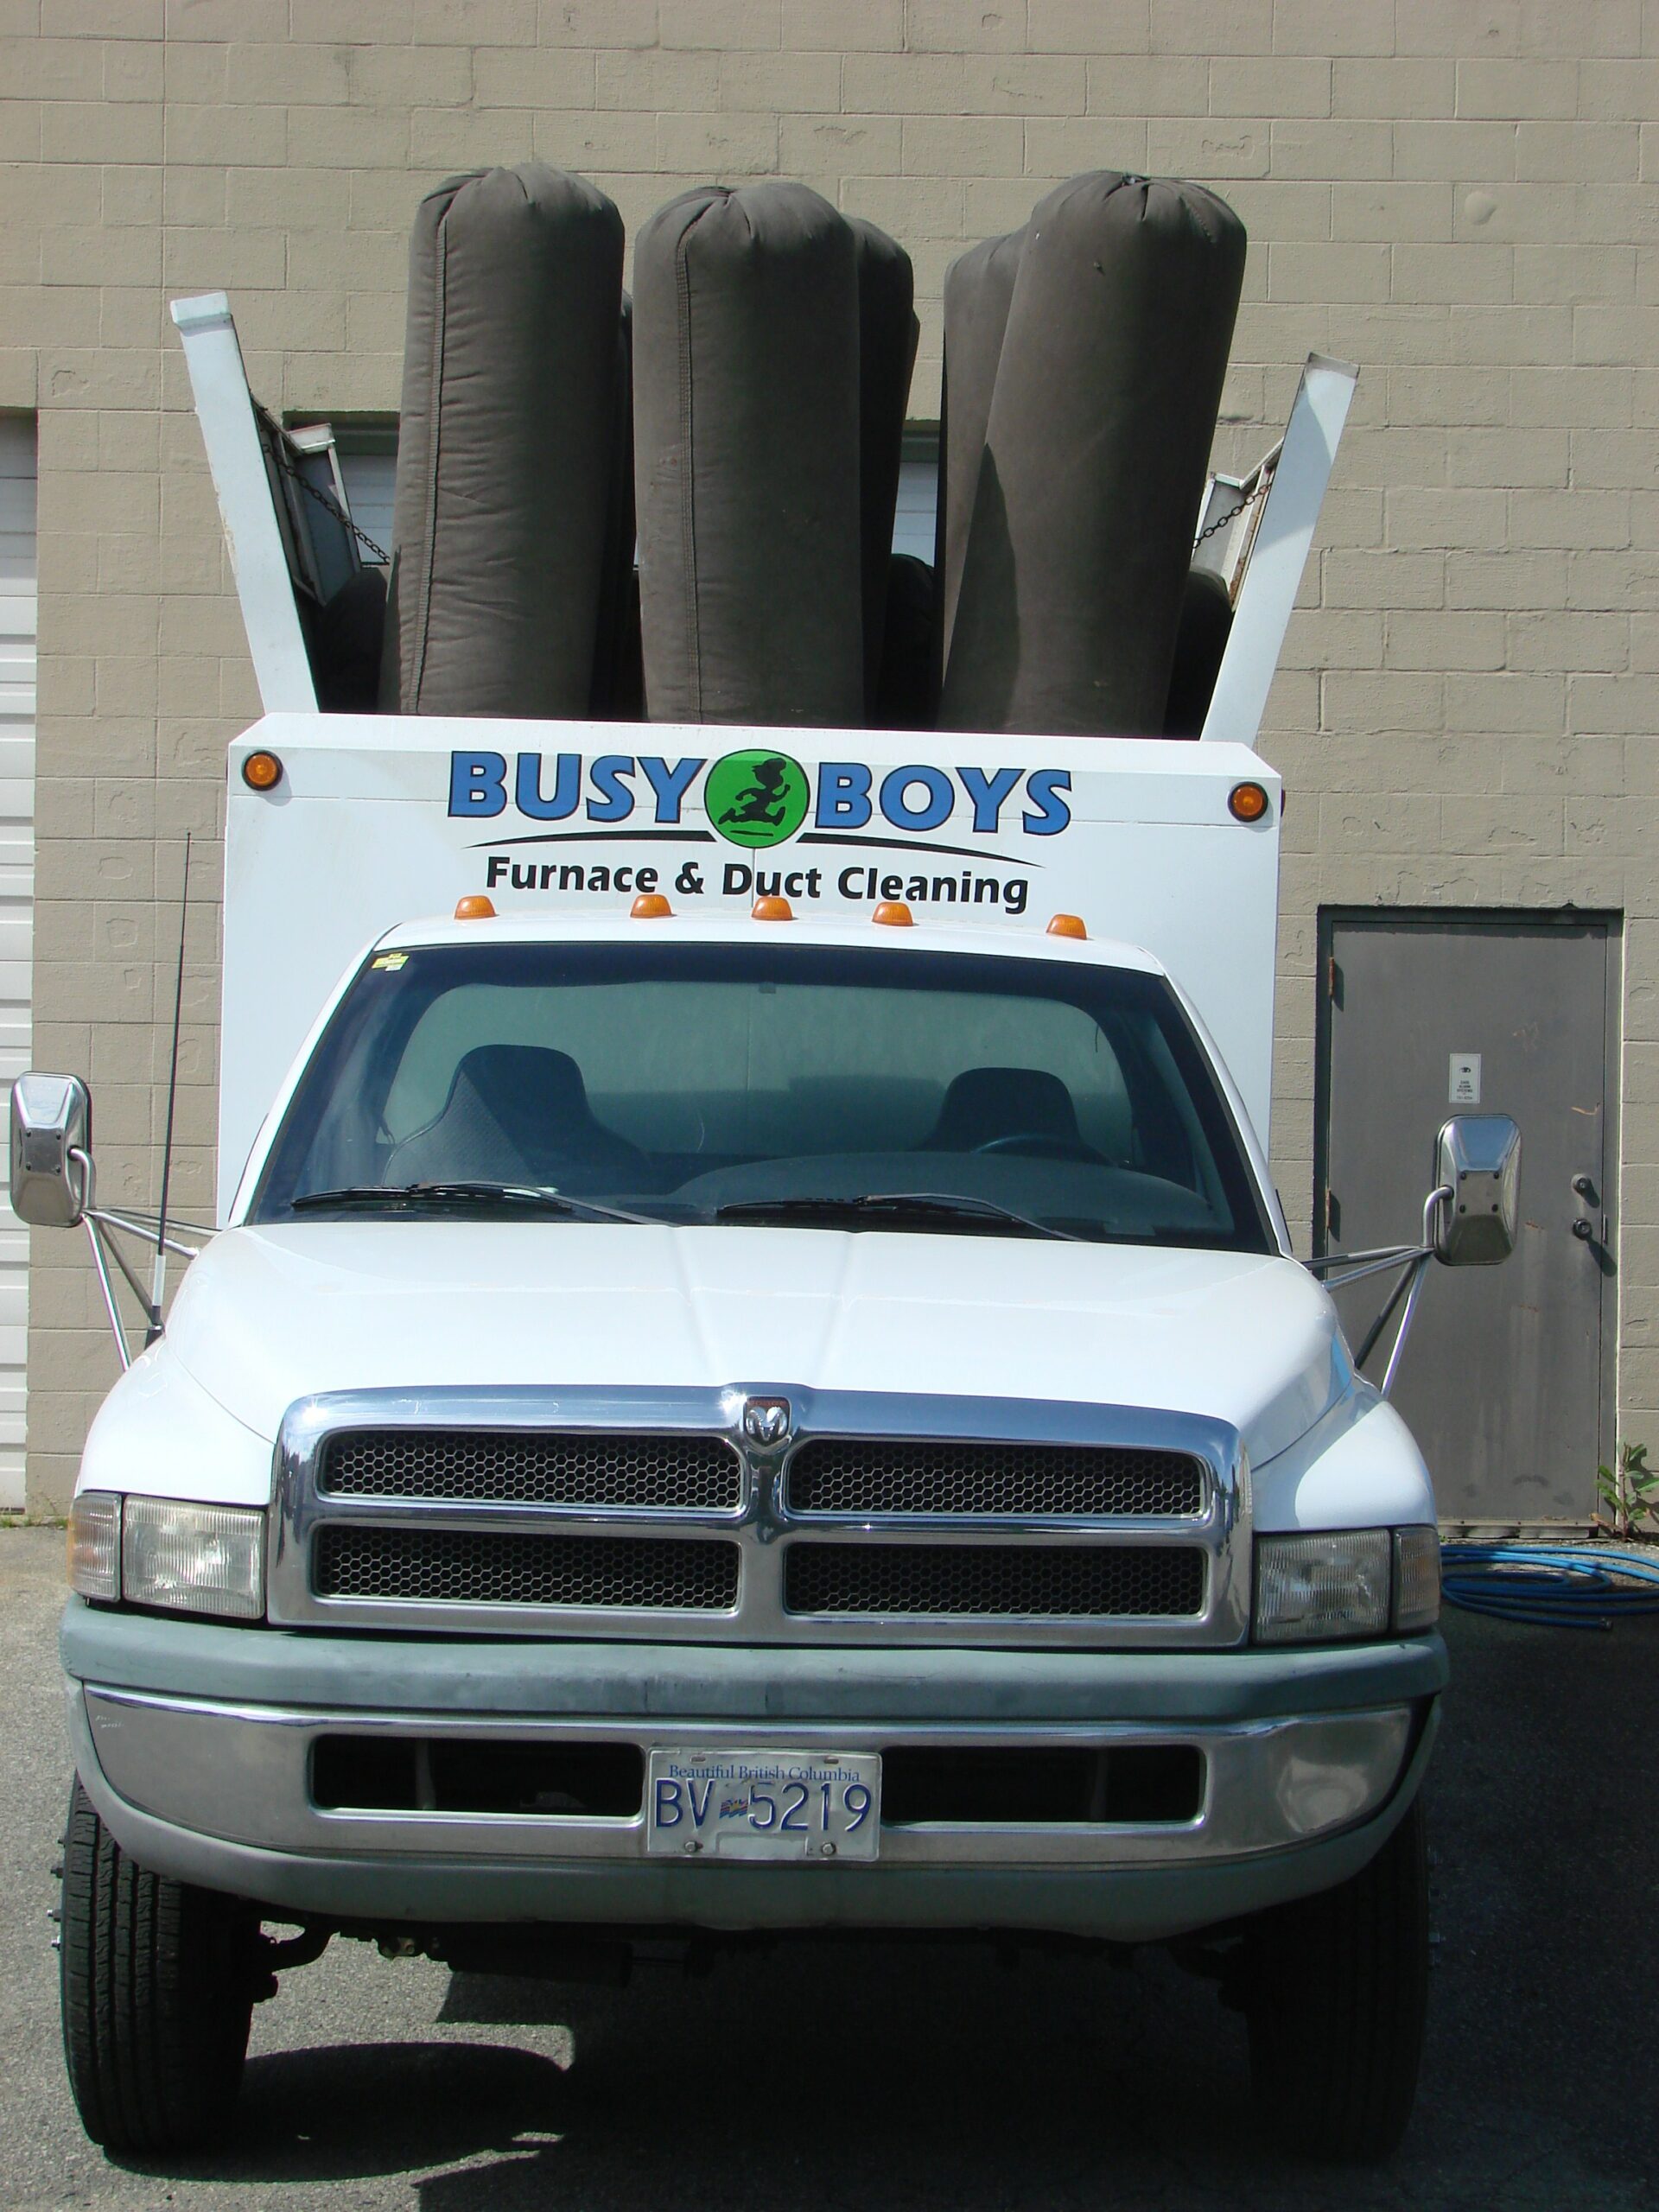 Busy Boys Cleaning Services, Furnace and Duct Cleaning, Surrey, BC